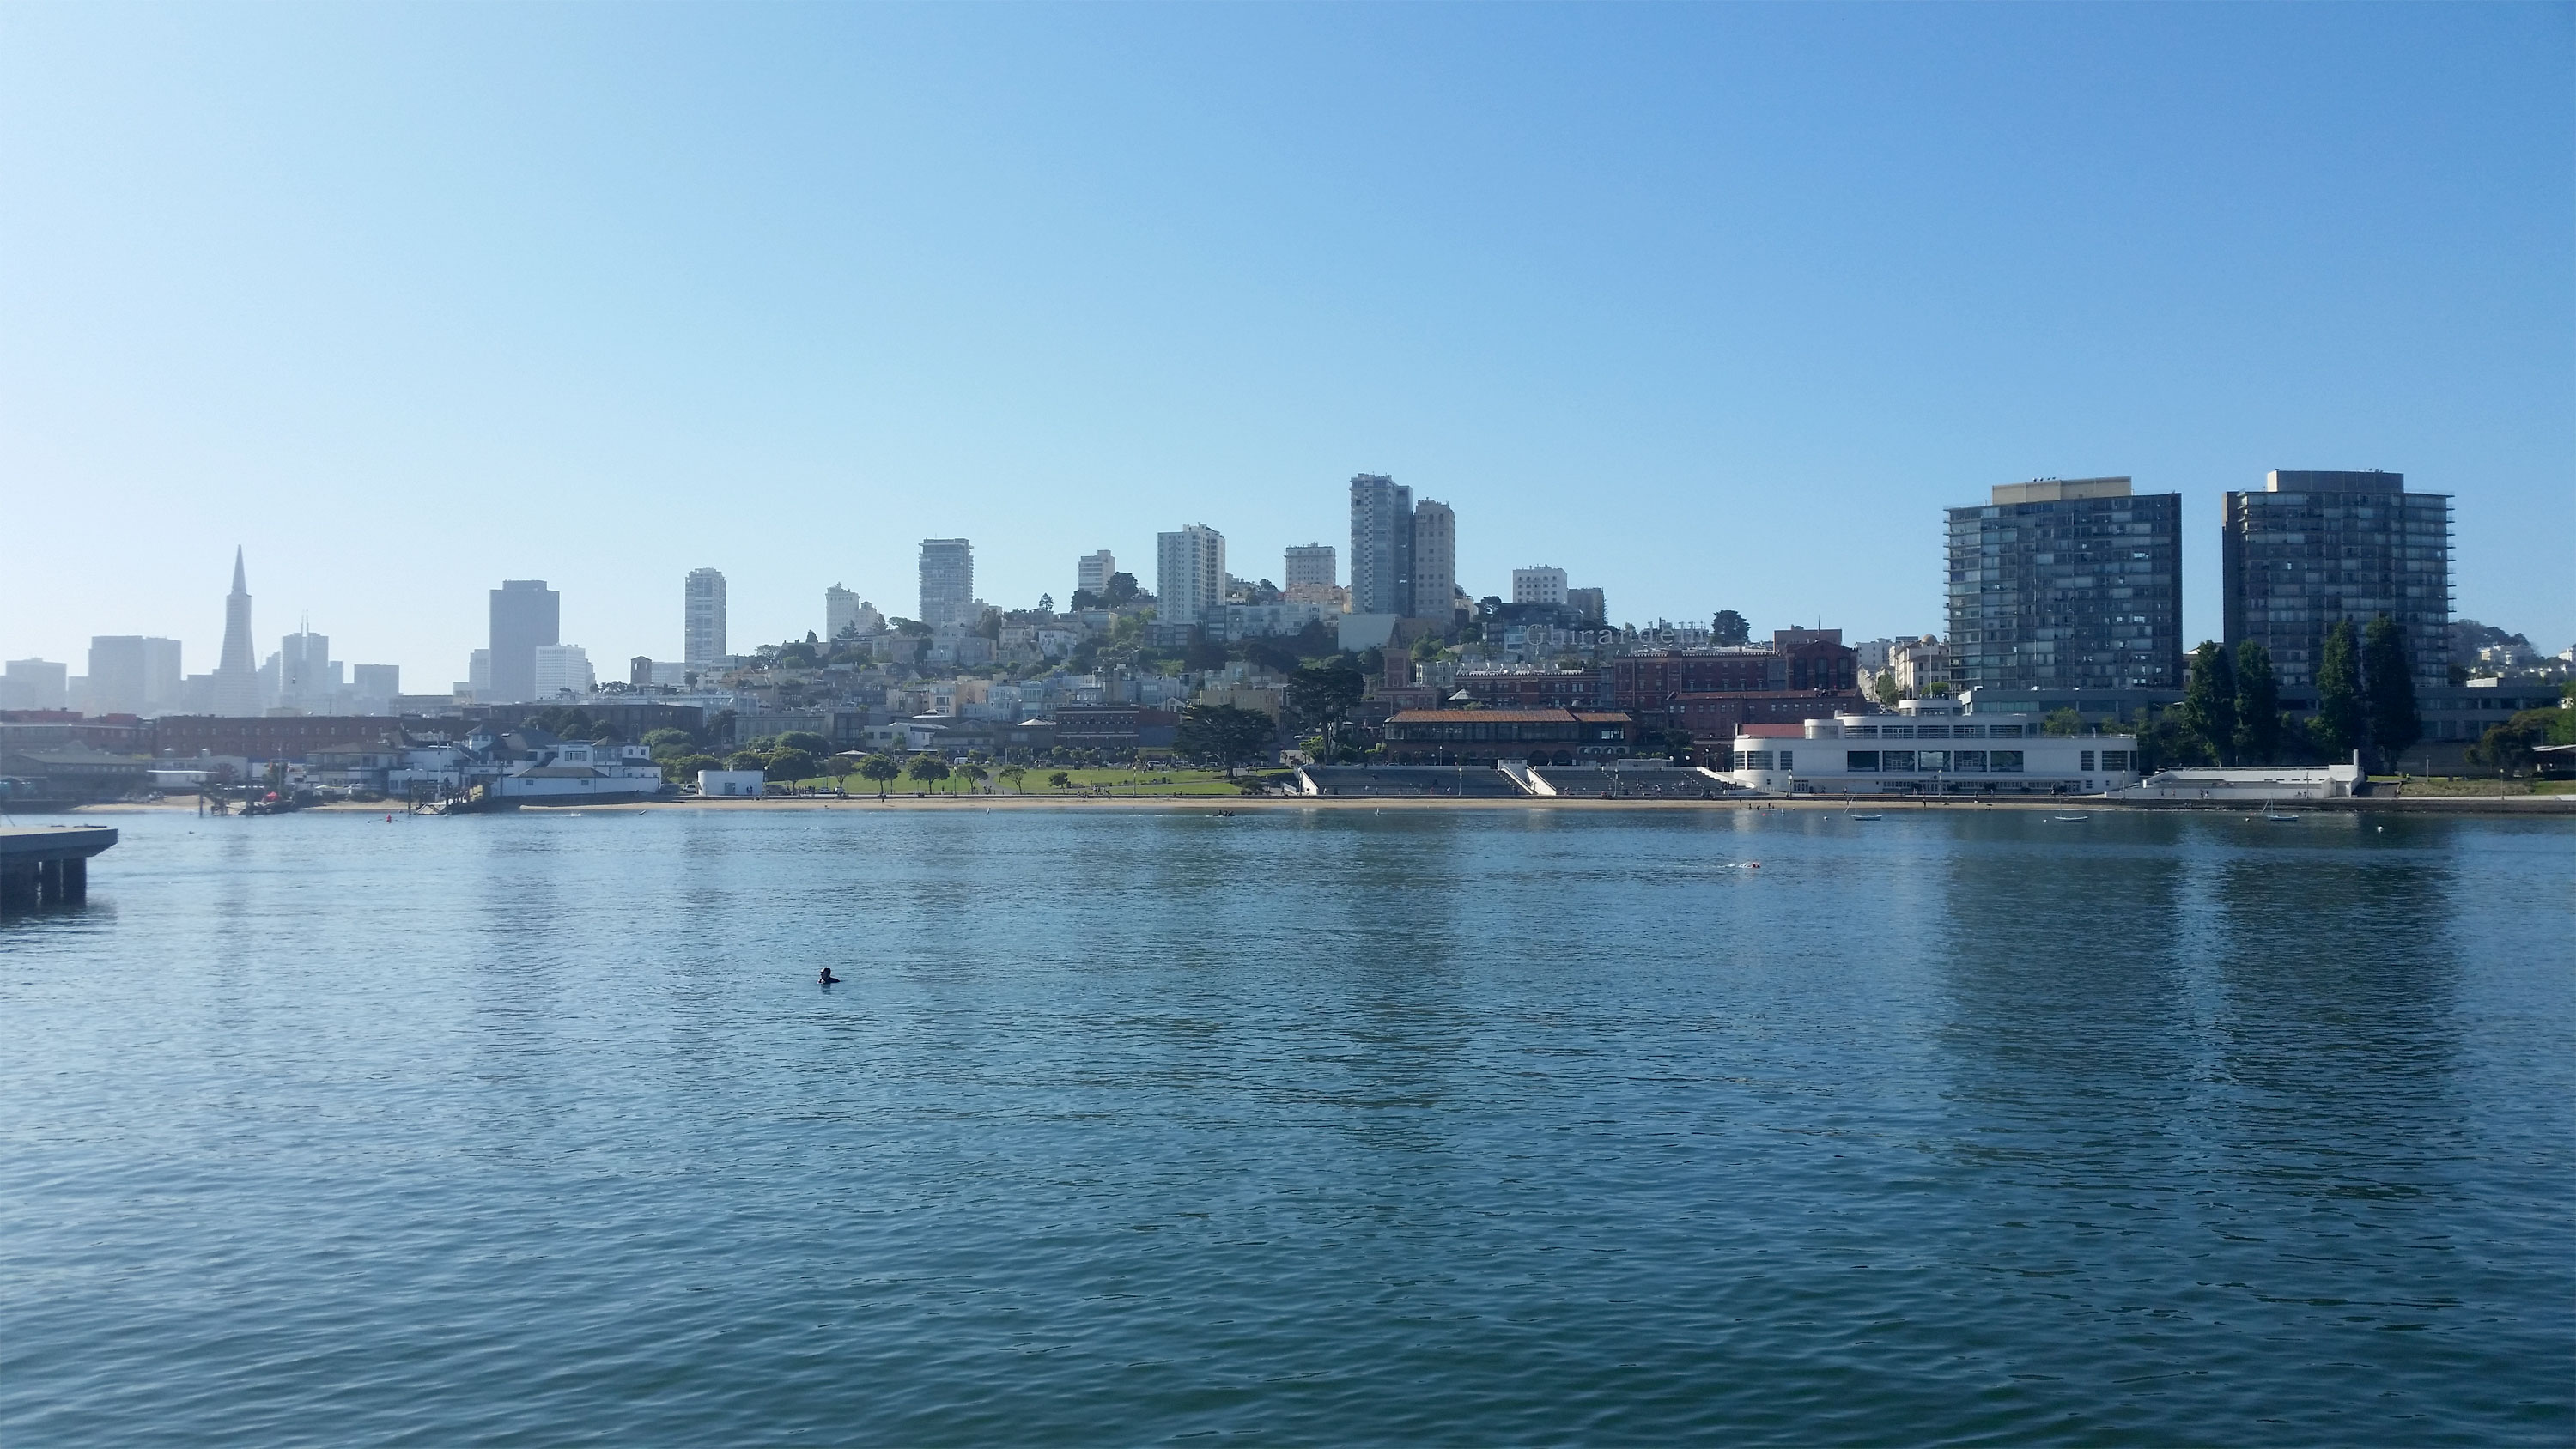 The historic fleet of the San Francisco Maritime National Historical Park is moored at the park's Hyde Street Pier.